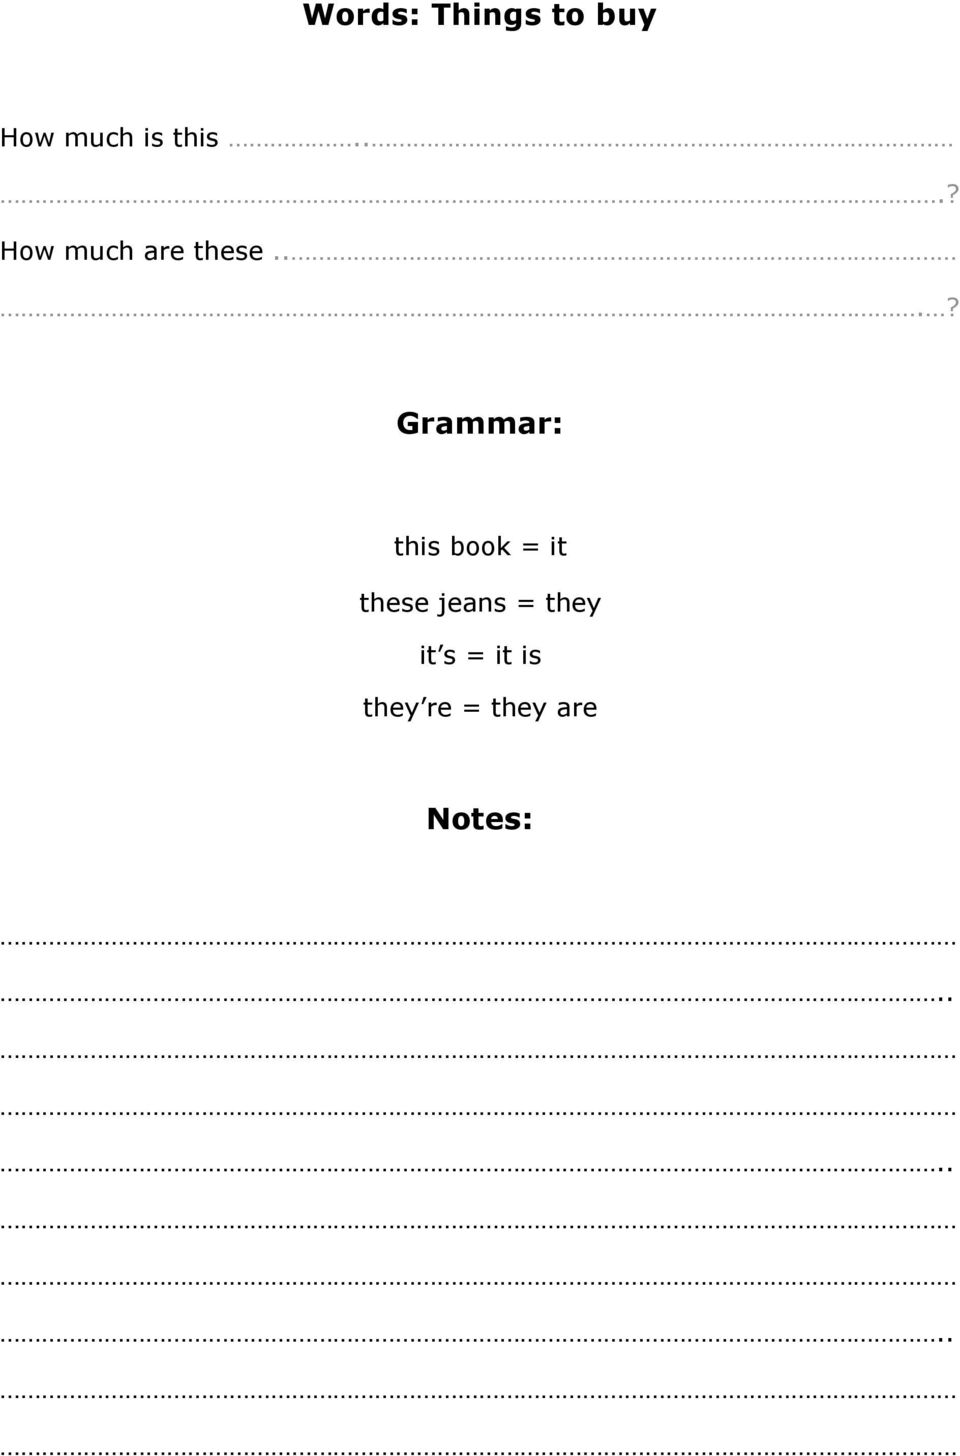 ..? Grammar: this book = it these